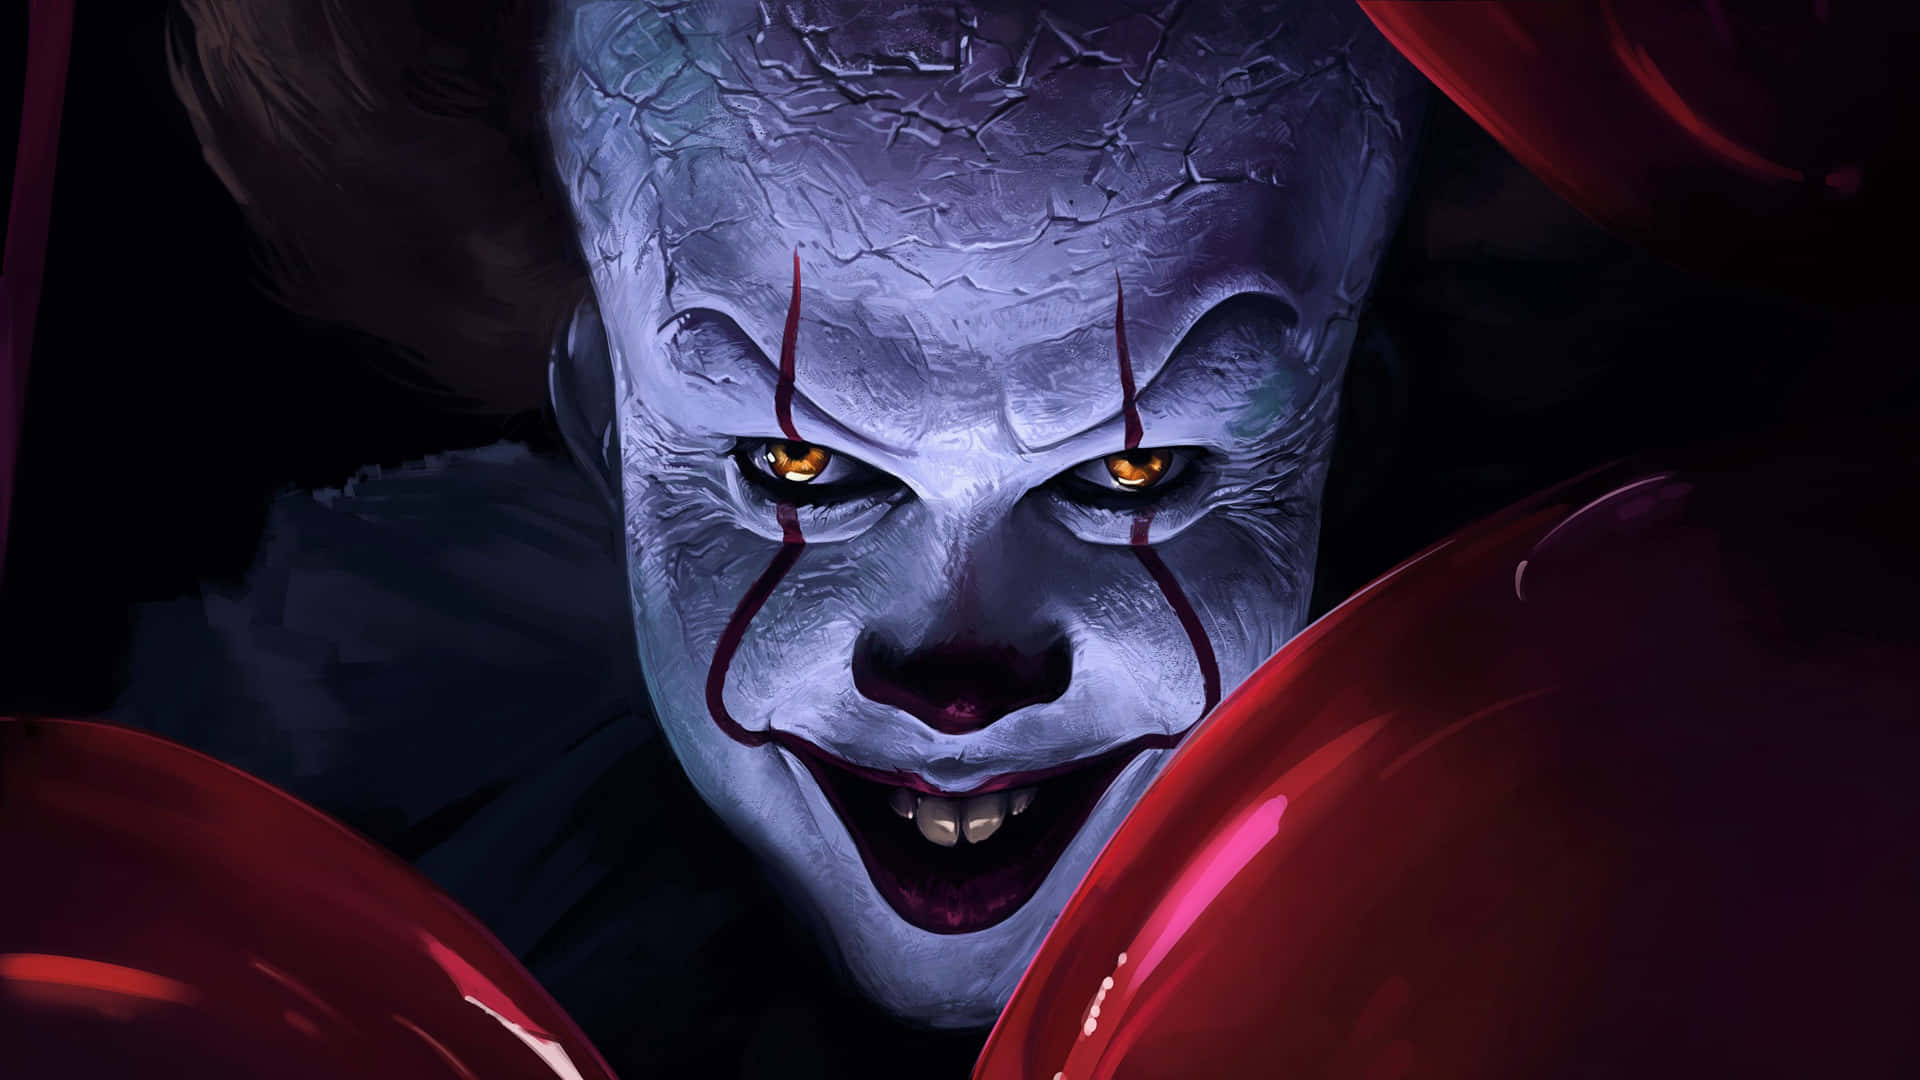 "Everyone's Fear: Pennywise the Dancing Clown" Wallpaper